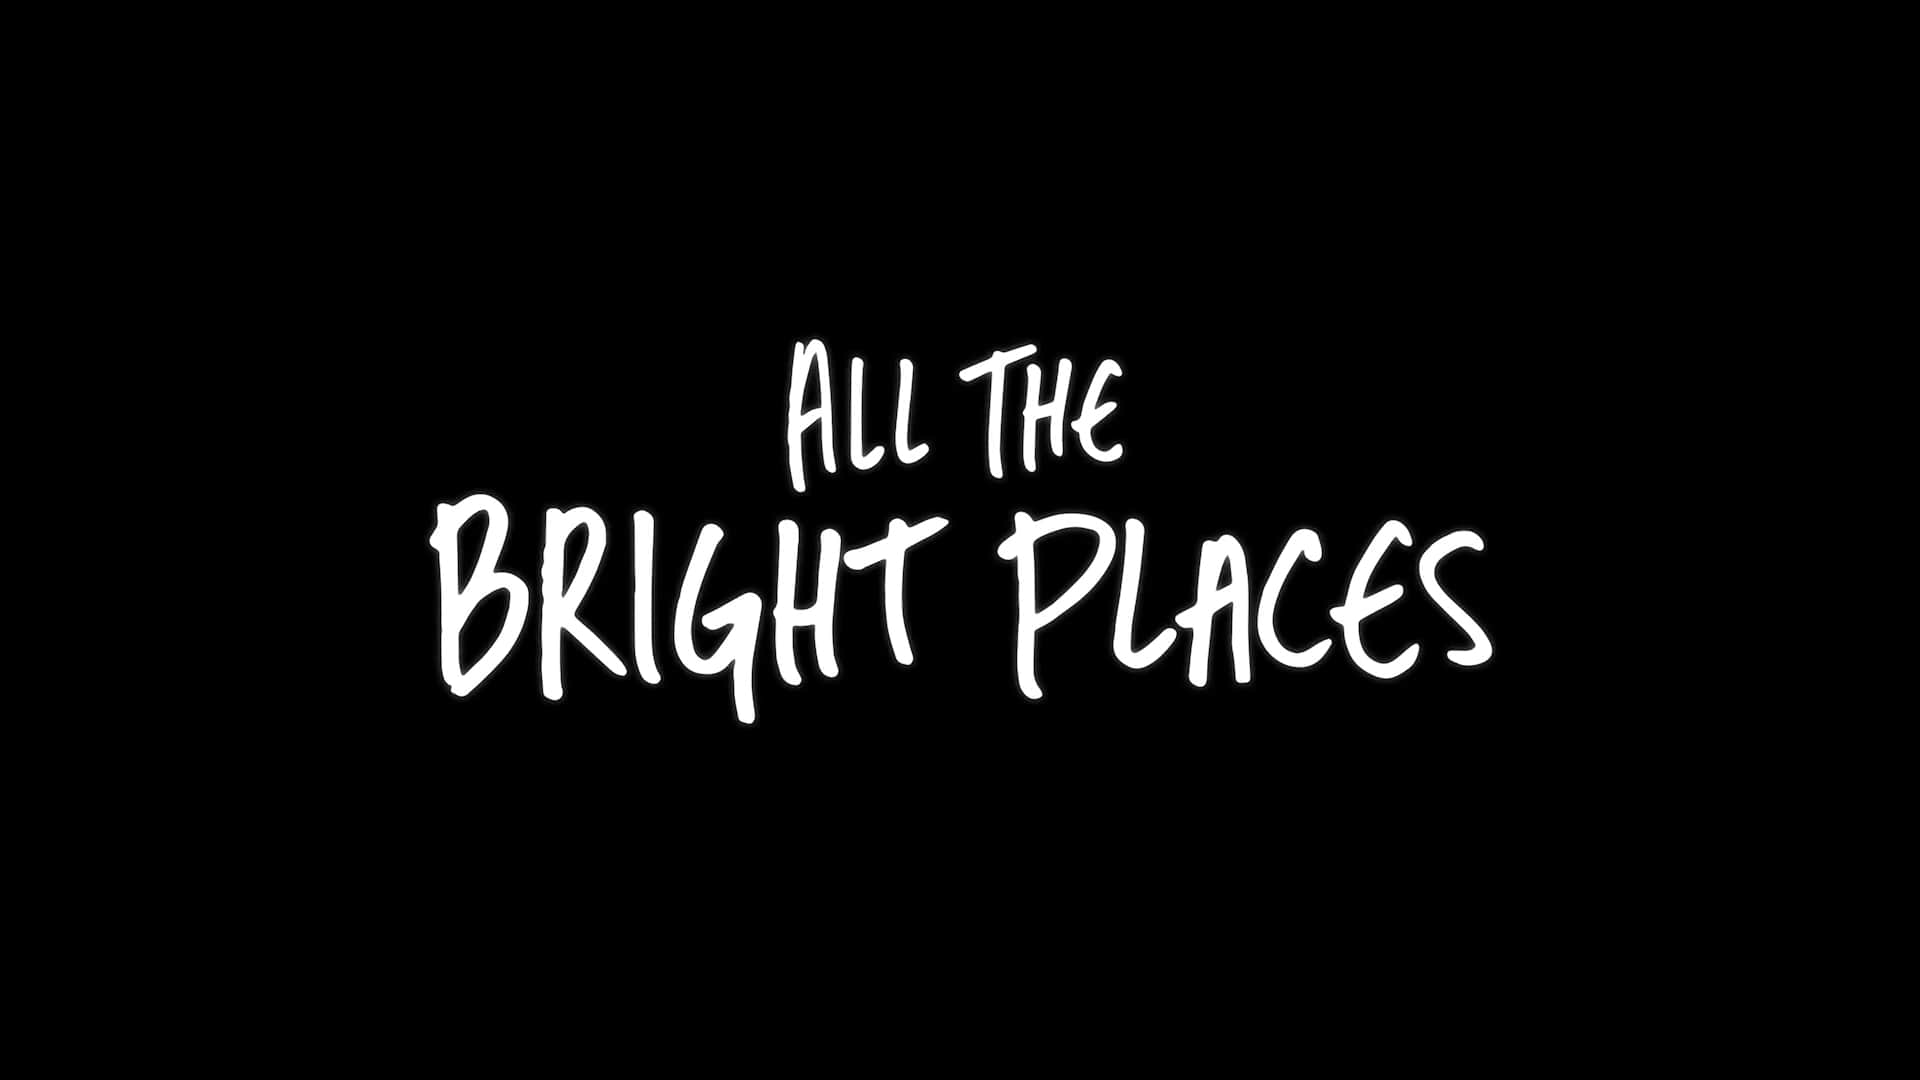 All the Bright Places Netflix Trailer, Best Netflix Dramas, Netflix Romantic Comedy, Coming to Netflix in March 2020